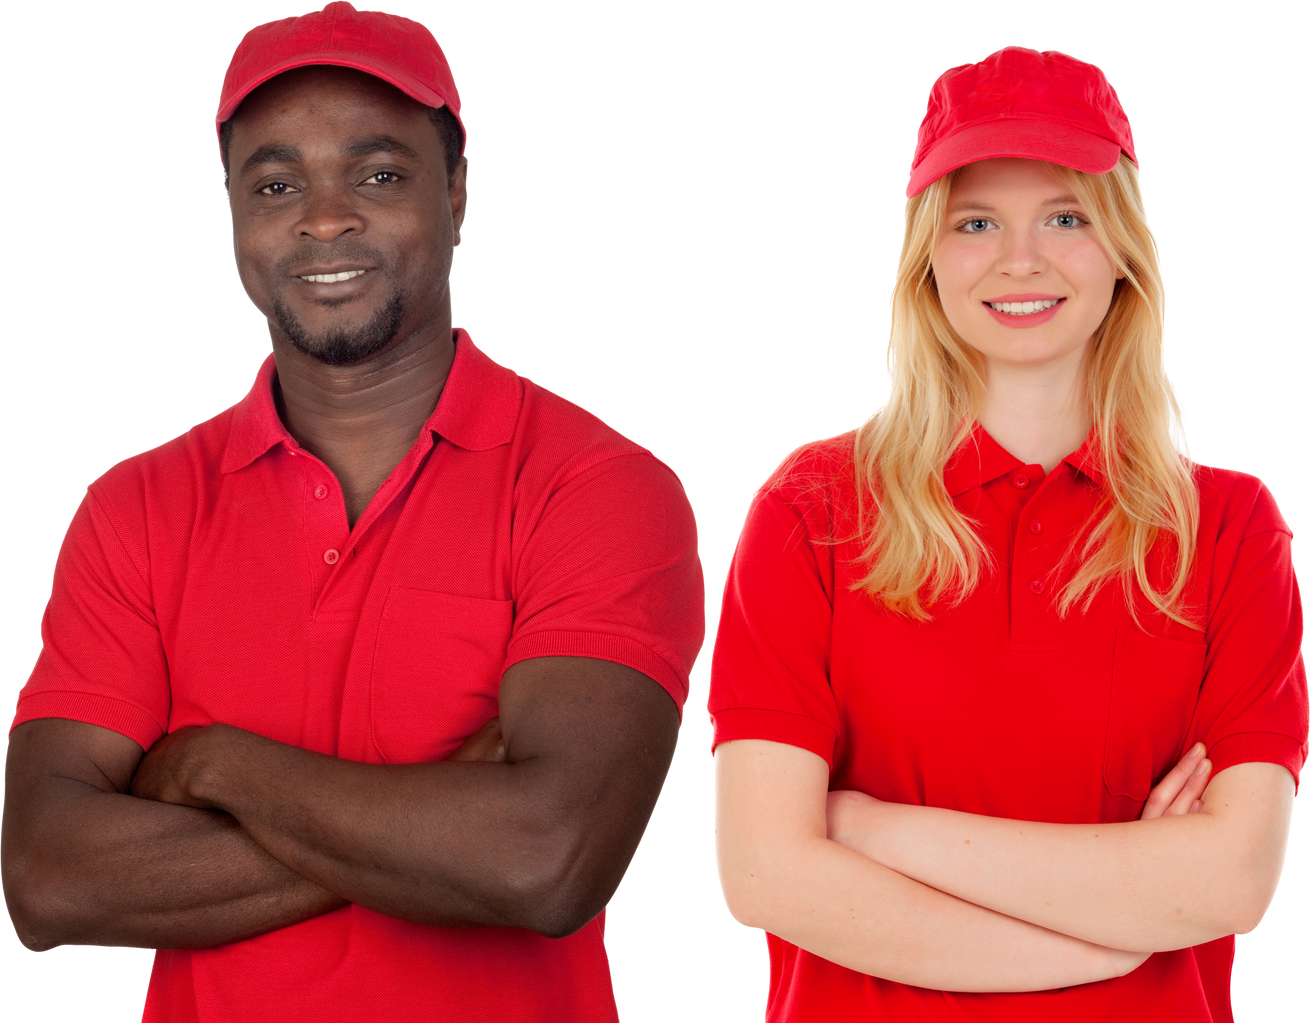 Co-Workers with Their Red Uniform